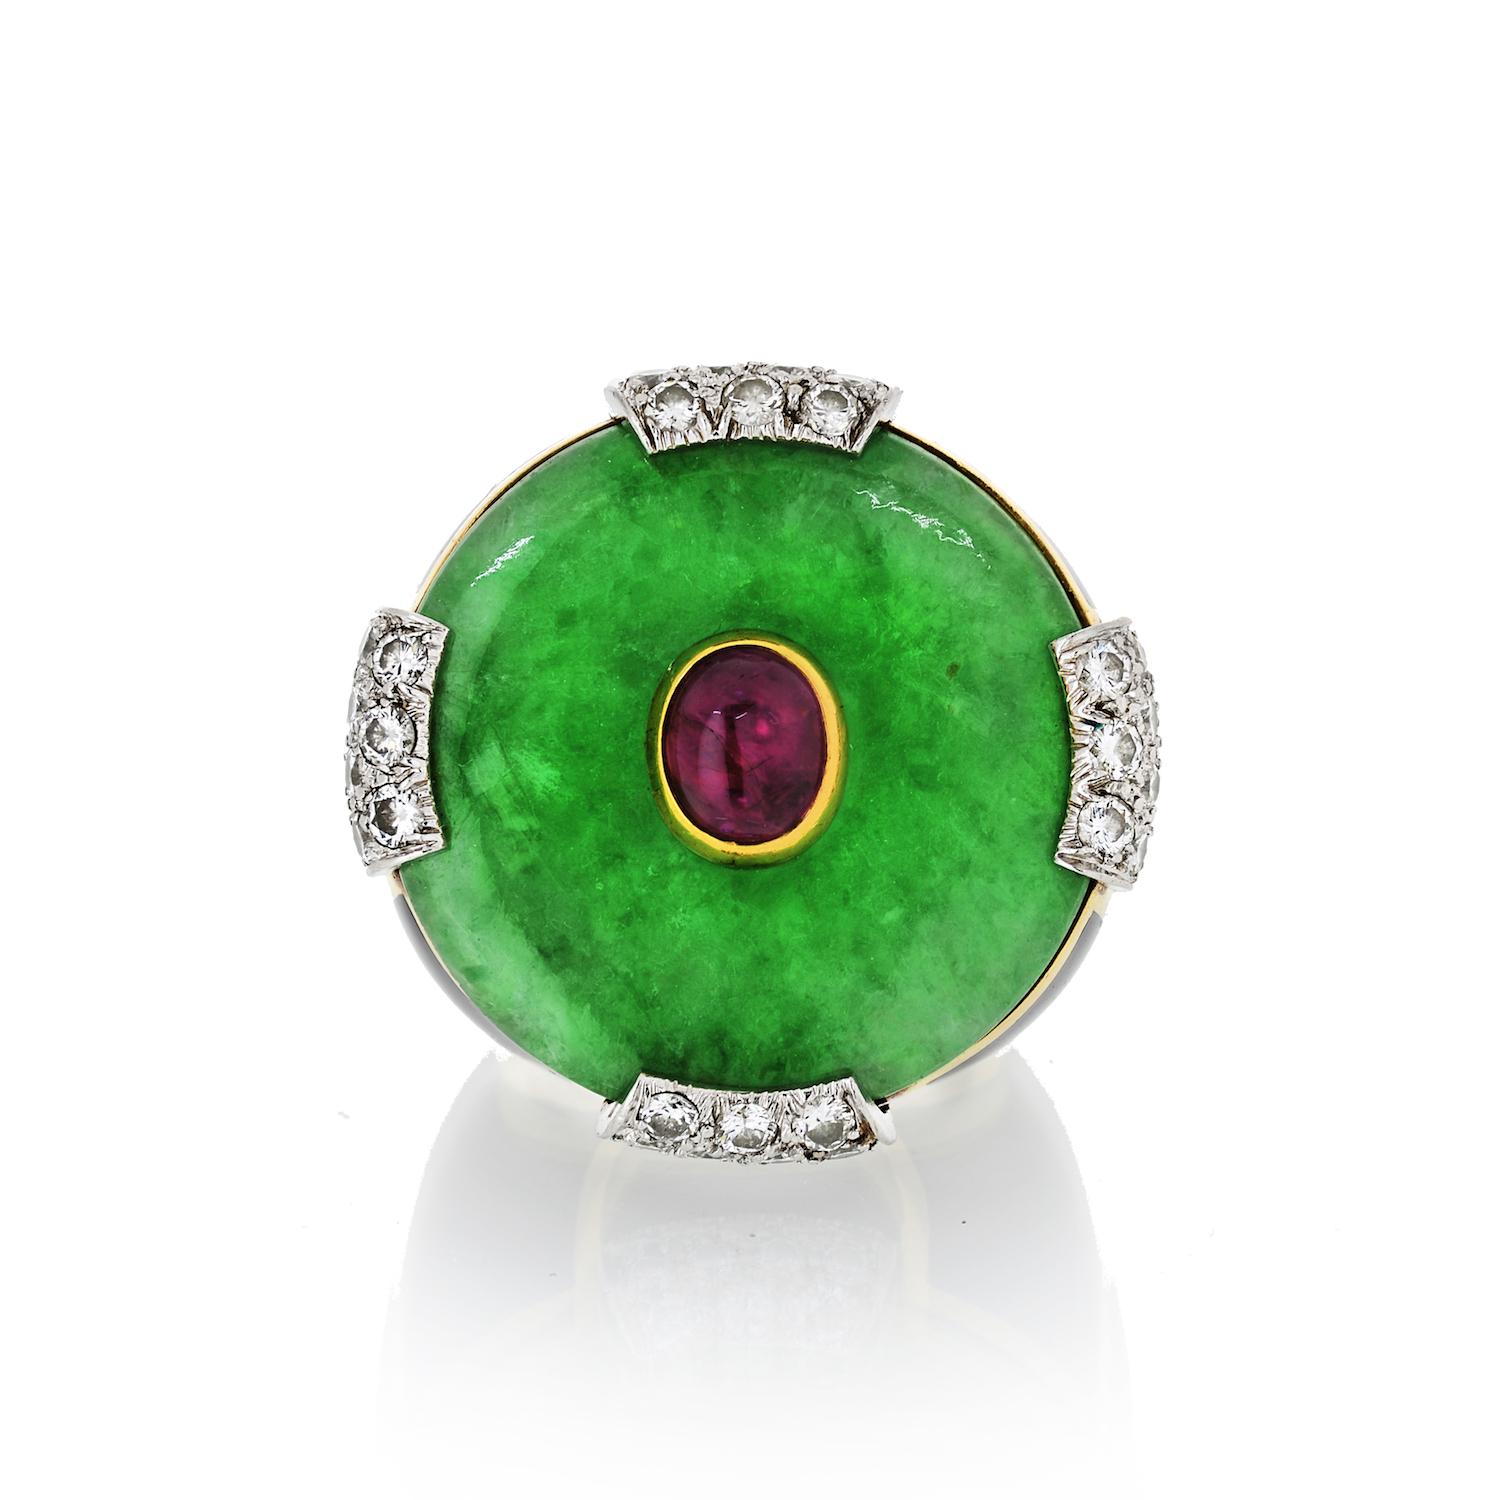 Questions? Call us anytime!
The Back Vault NYC.
833,998,2858

Centering a jade disc studded with a bezel-set cabochon ruby, accented with round brilliant-cut diamonds, to the shank applied with black enamel detail; by David Webb, estimated total